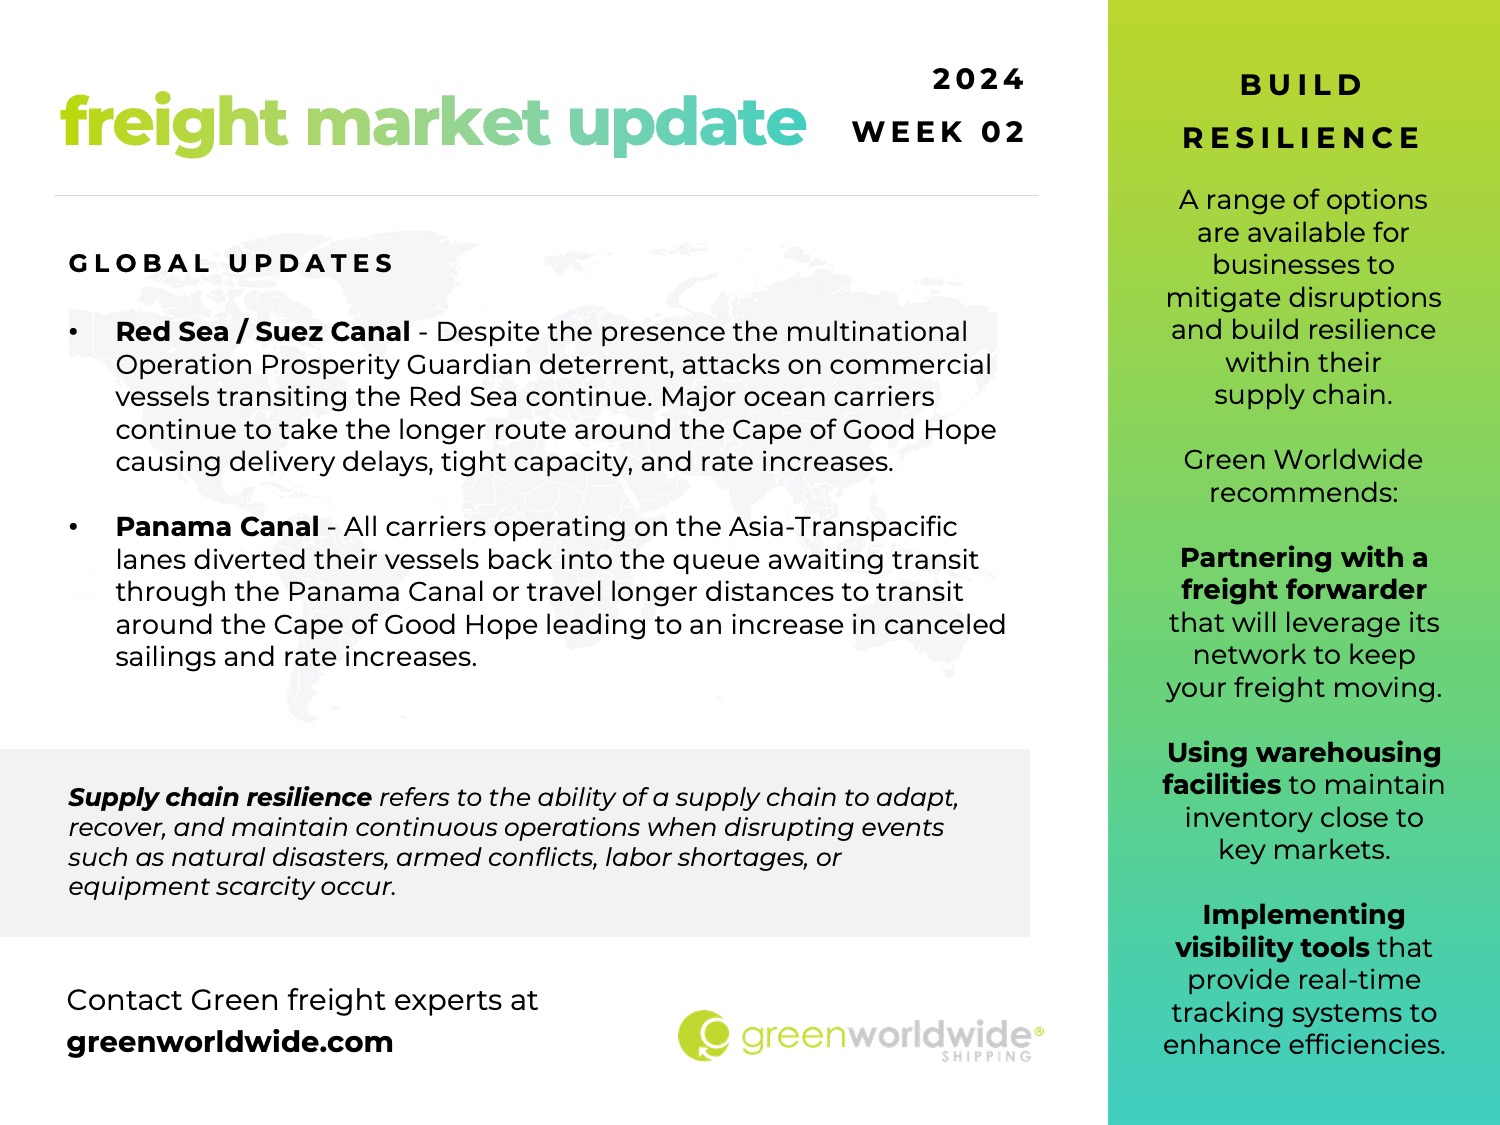 freight market update 2024 WEEK 02 BUILD RESILIENCE A range of options are available for businesses to mitigate disruptions and build resilience within their supply chain. Green Worldwide recommends: Partnering with a freight forwarder that will leverage its network to keep your freight moving. Using warehousing facilities to maintain inventory close to key markets. Implementing visibility tools that provide real-time tracking systems to enhance efficiencies. GLOBAL UPDATES Red Sea / Suez Canal - Despite the presence the multinational Operation Prosperity Guardian deterrent, attacks on commercial vessels transiting the Red Sea continue. Major ocean carriers continue to take the longer route around the Cape of Good Hope causing delivery delays, tight capacity, and rate increases. Panama Canal - All carriers operating on the Asia-Transpacific lanes diverted their vessels back into the queue awaiting transit through the Panama Canal or travel longer distances to transit around the Cape of Good Hope leading to an increase in canceled sailings and rate increases. Supply chain resilience refers to the ability of a supply chain to adapt, recover, and maintain continuous operations when disrupting events such as natural disasters, armed conflicts, labor shortages, or equipment scarcity occur. Contact Green freight experts atgreenworldwide.com